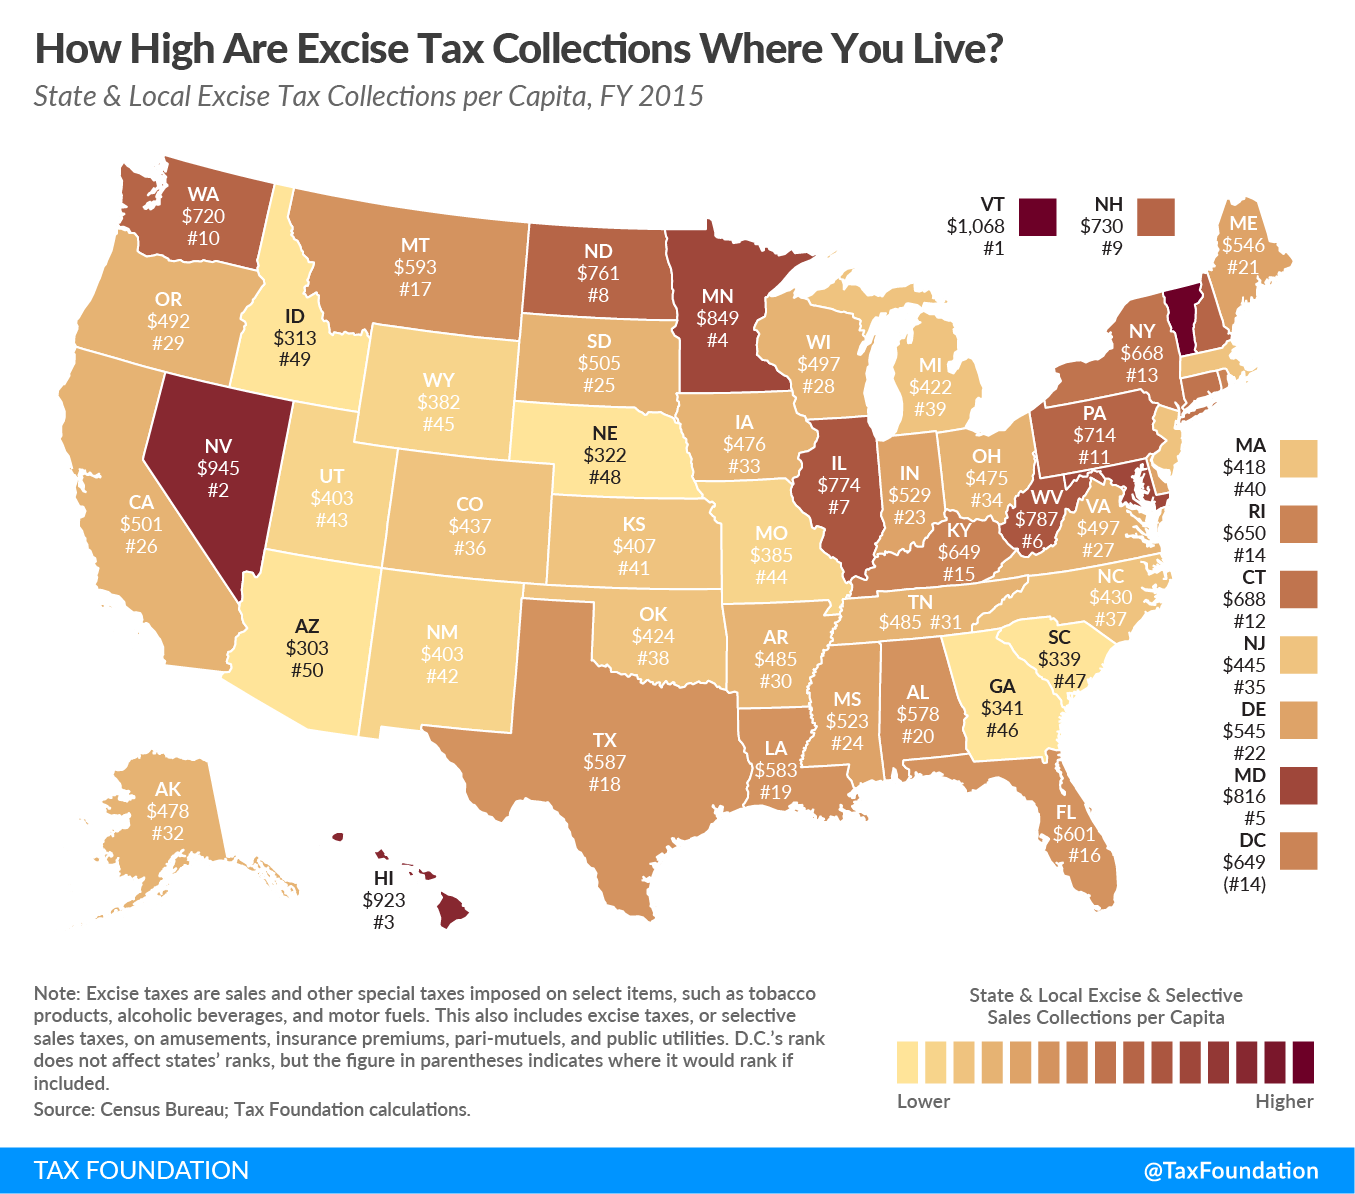 State & Local Excise Tax Collections per Capita, FY 2015